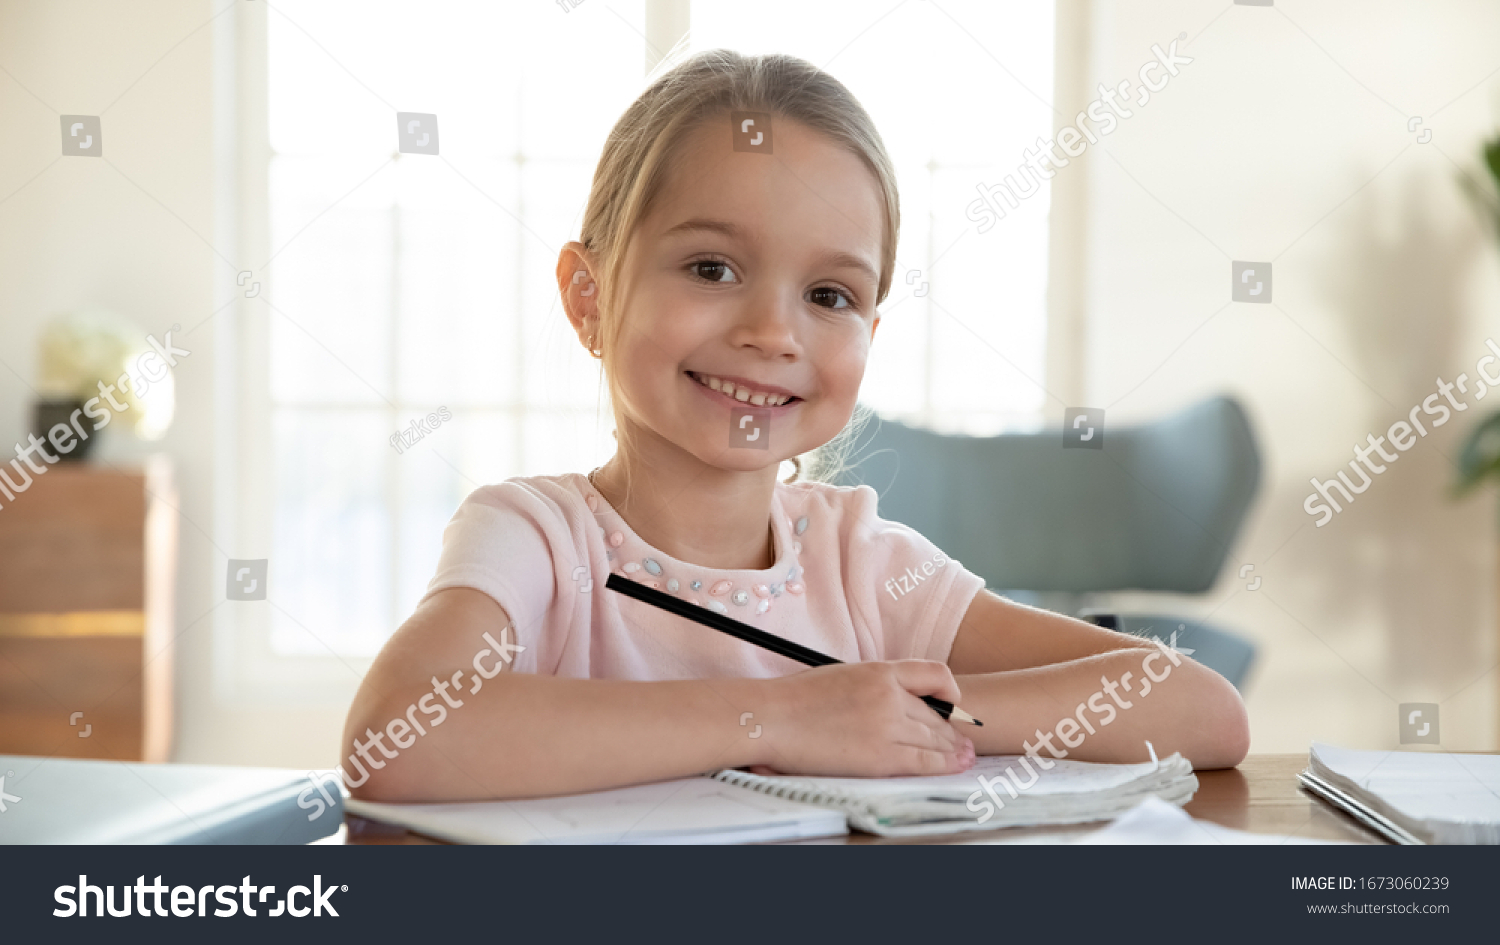 Head shot close up portrait of happy small pupil learning at home. Smiling little child girl enjoying doing lessons in living room. Smart kid schoolgirl looking at camera, studying remotely online. #1673060239